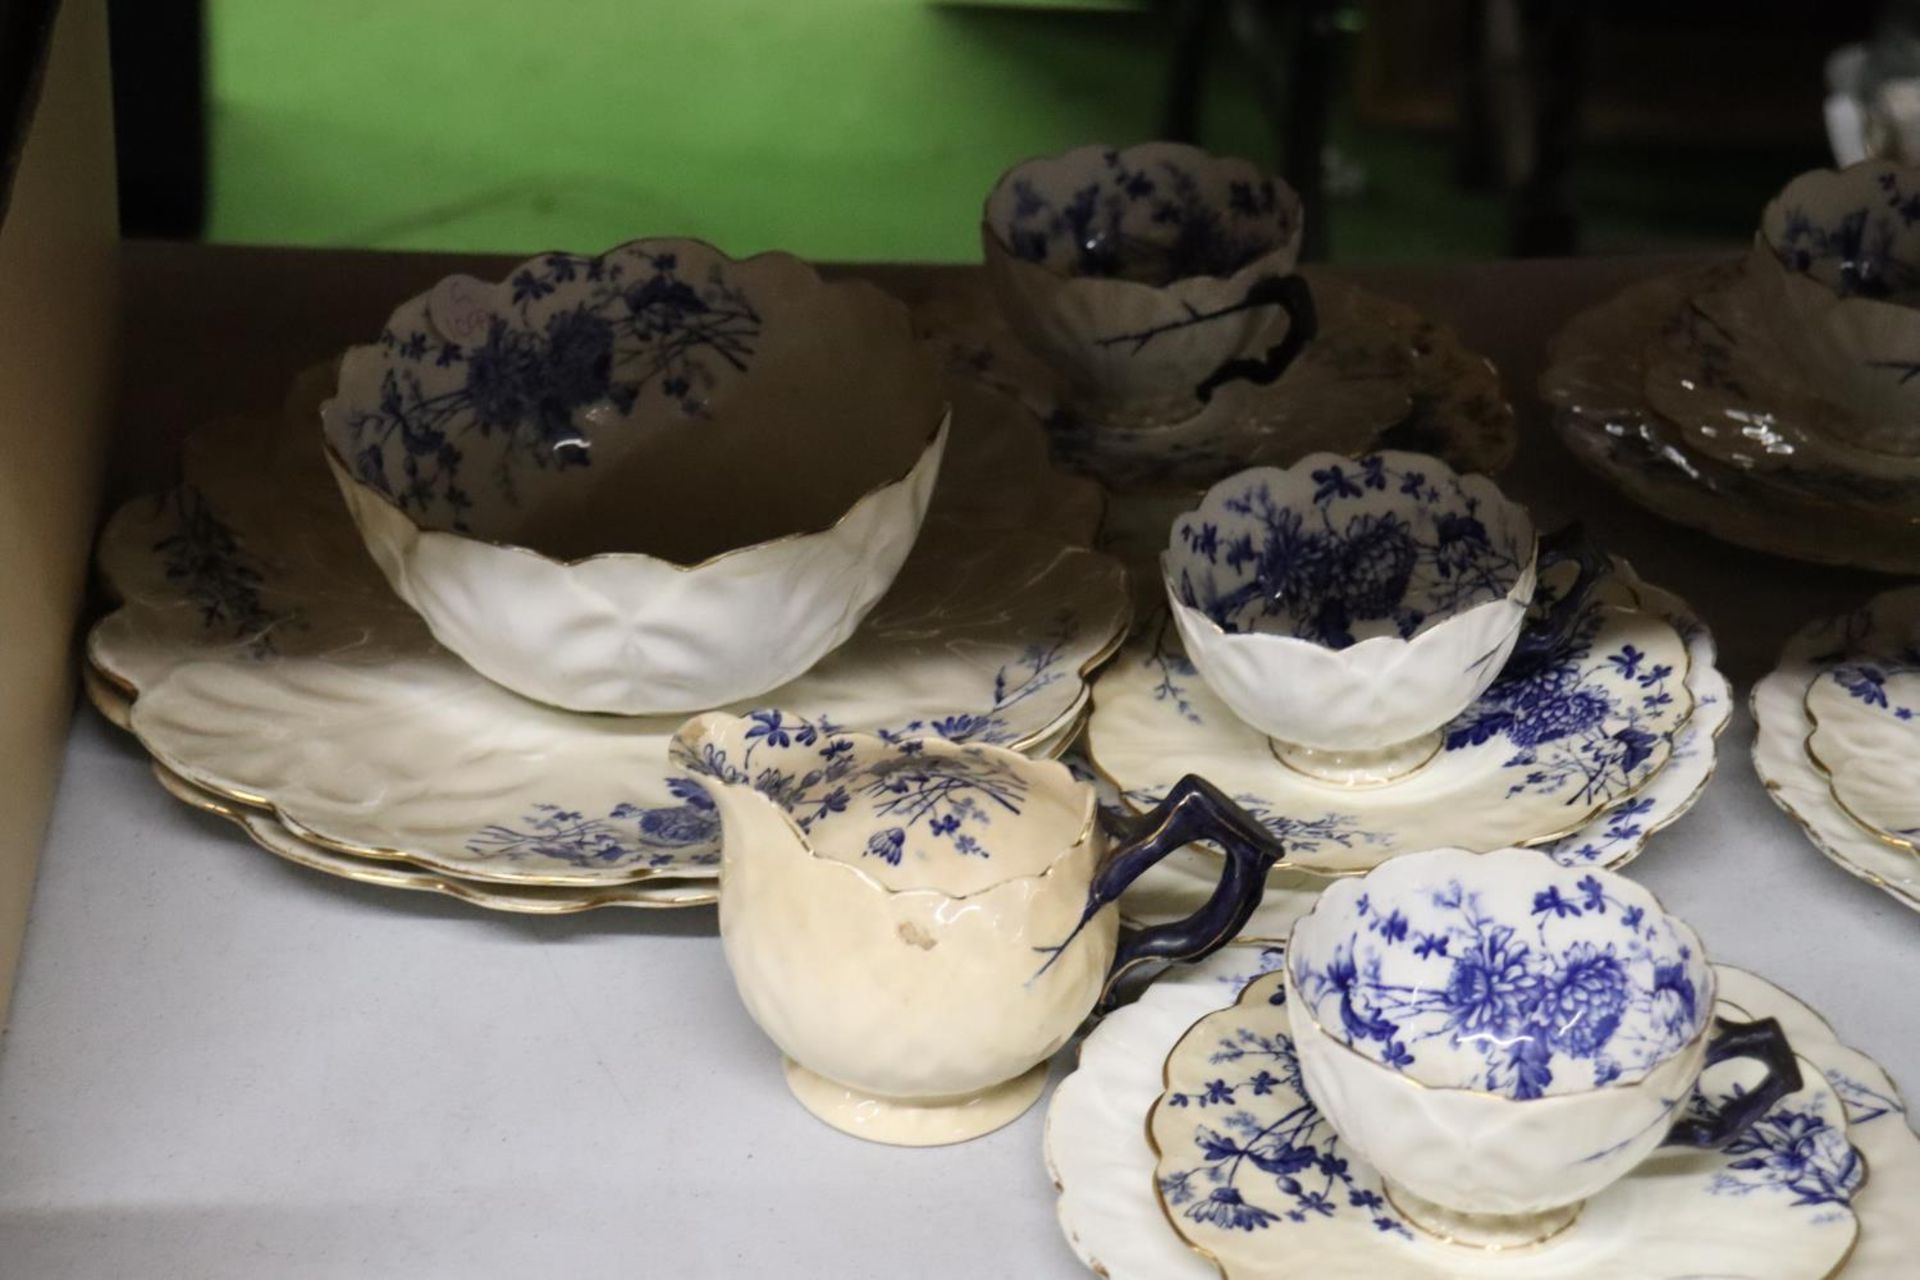 A VINTAGE CHINA TEASET SET, WITH BLUE AND WHITE PATTERN AND FLUTED EDGES, TO INCLUDE CAKE PLATES, - Image 3 of 5